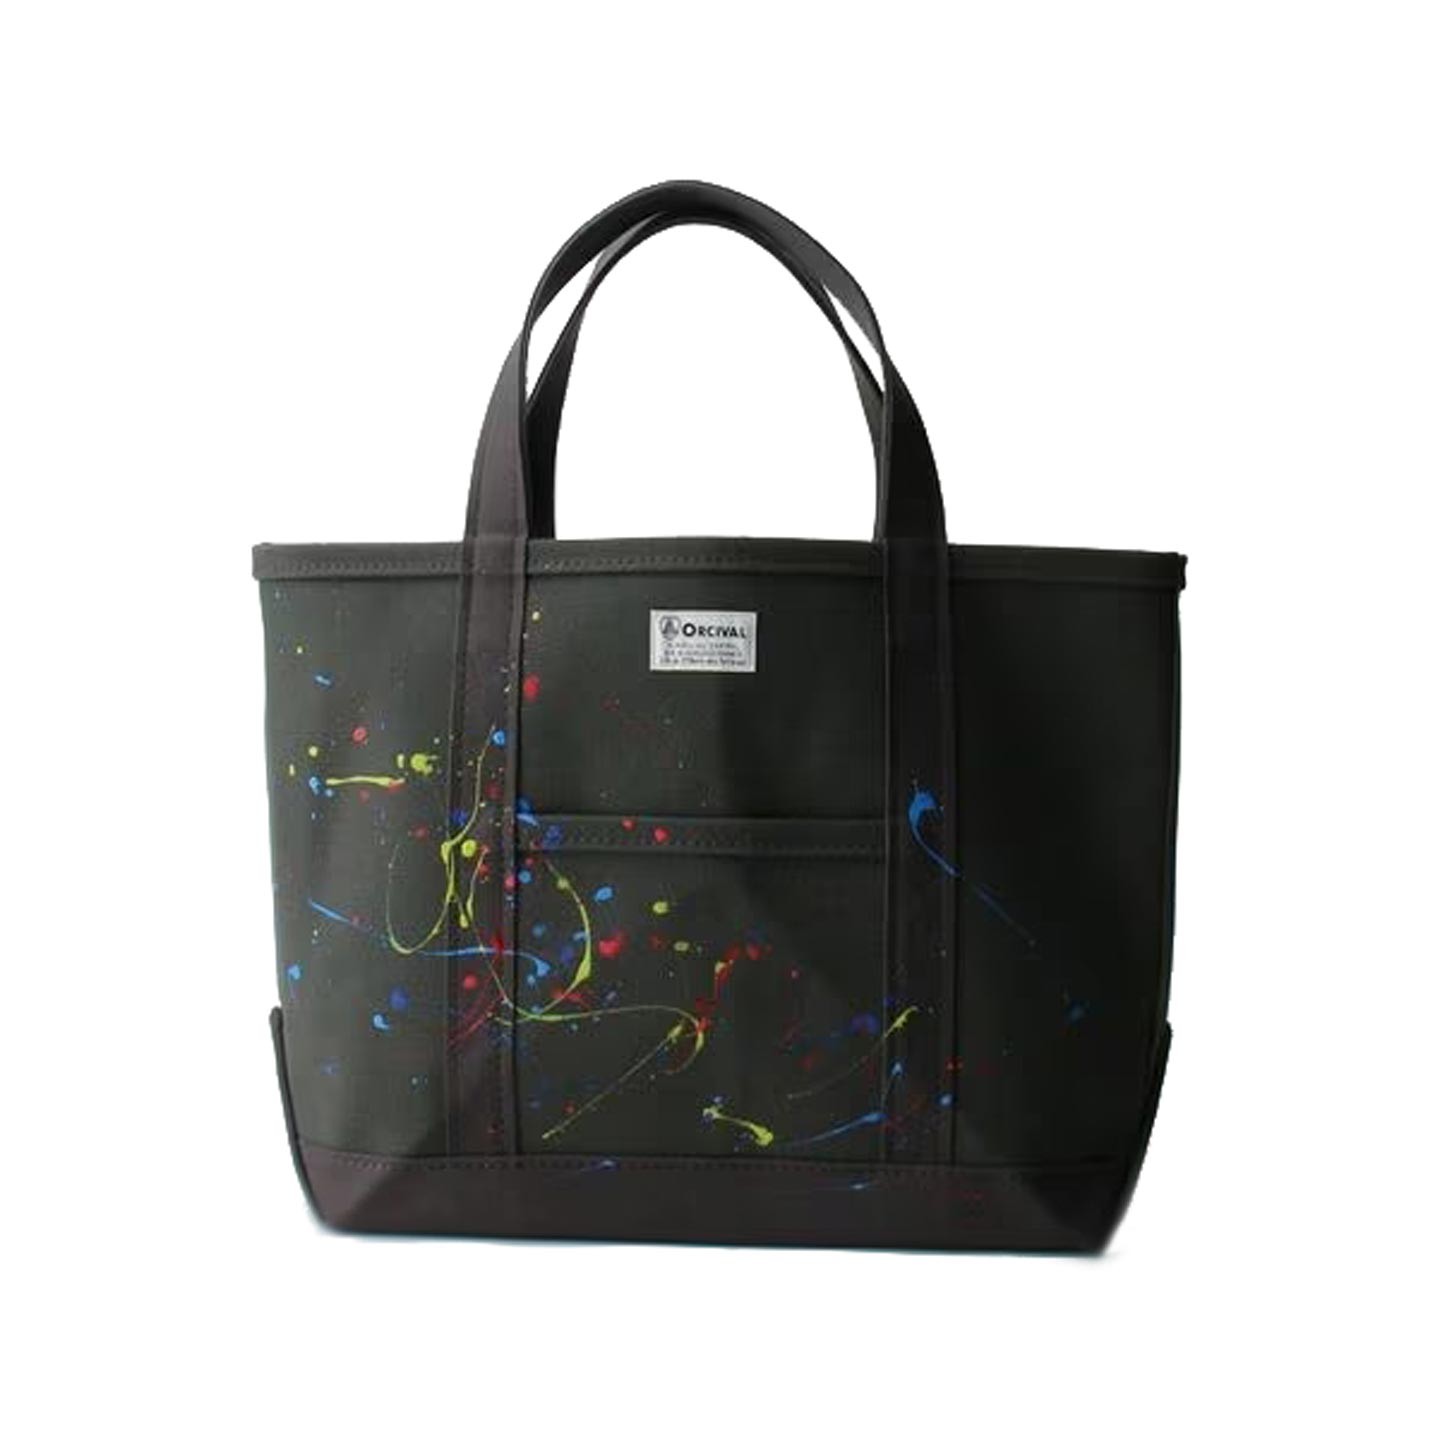 Painted charcoal canvas tote bag medium